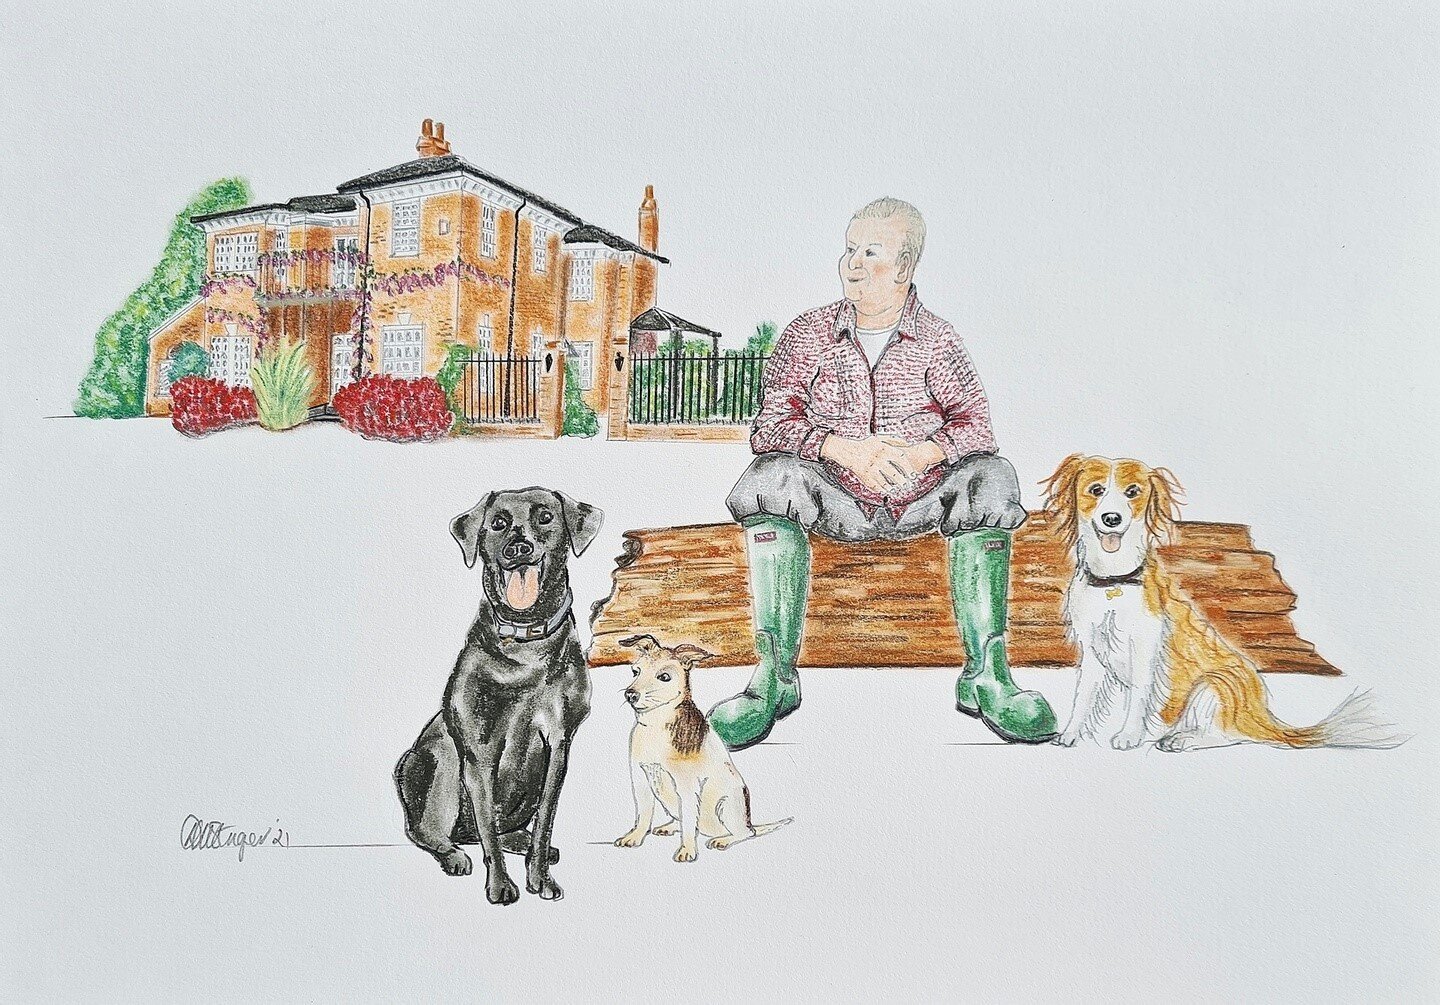 I really wanted to be a fly on the wall when this fathers day present was given! James's son asked for not only his Dad's beloved dogs to be included, but also his beautiful house! (Hands up who wants to live there??). Wasn't that a lovely idea? 

I&